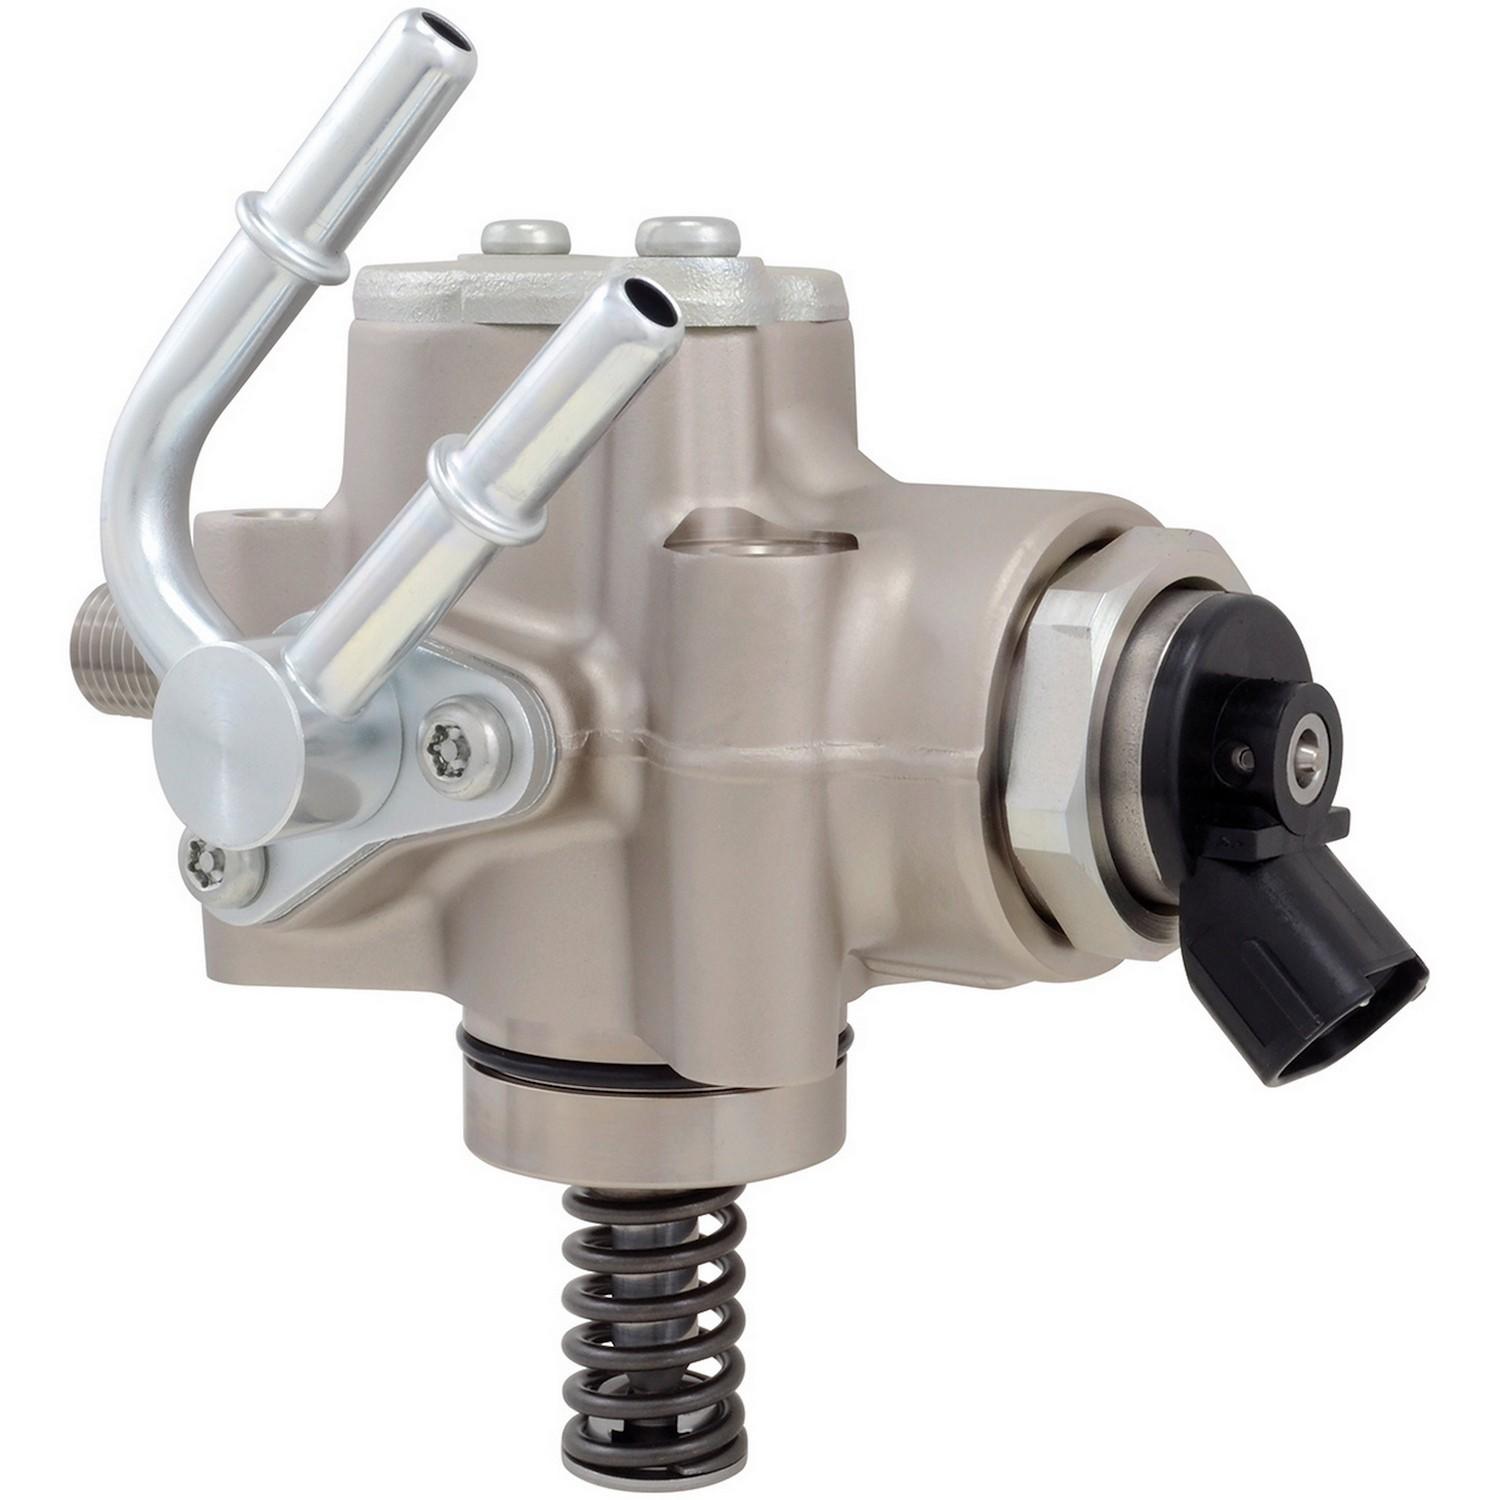 Front View of Direct Injection High Pressure Fuel Pump HITACHI HPP0027